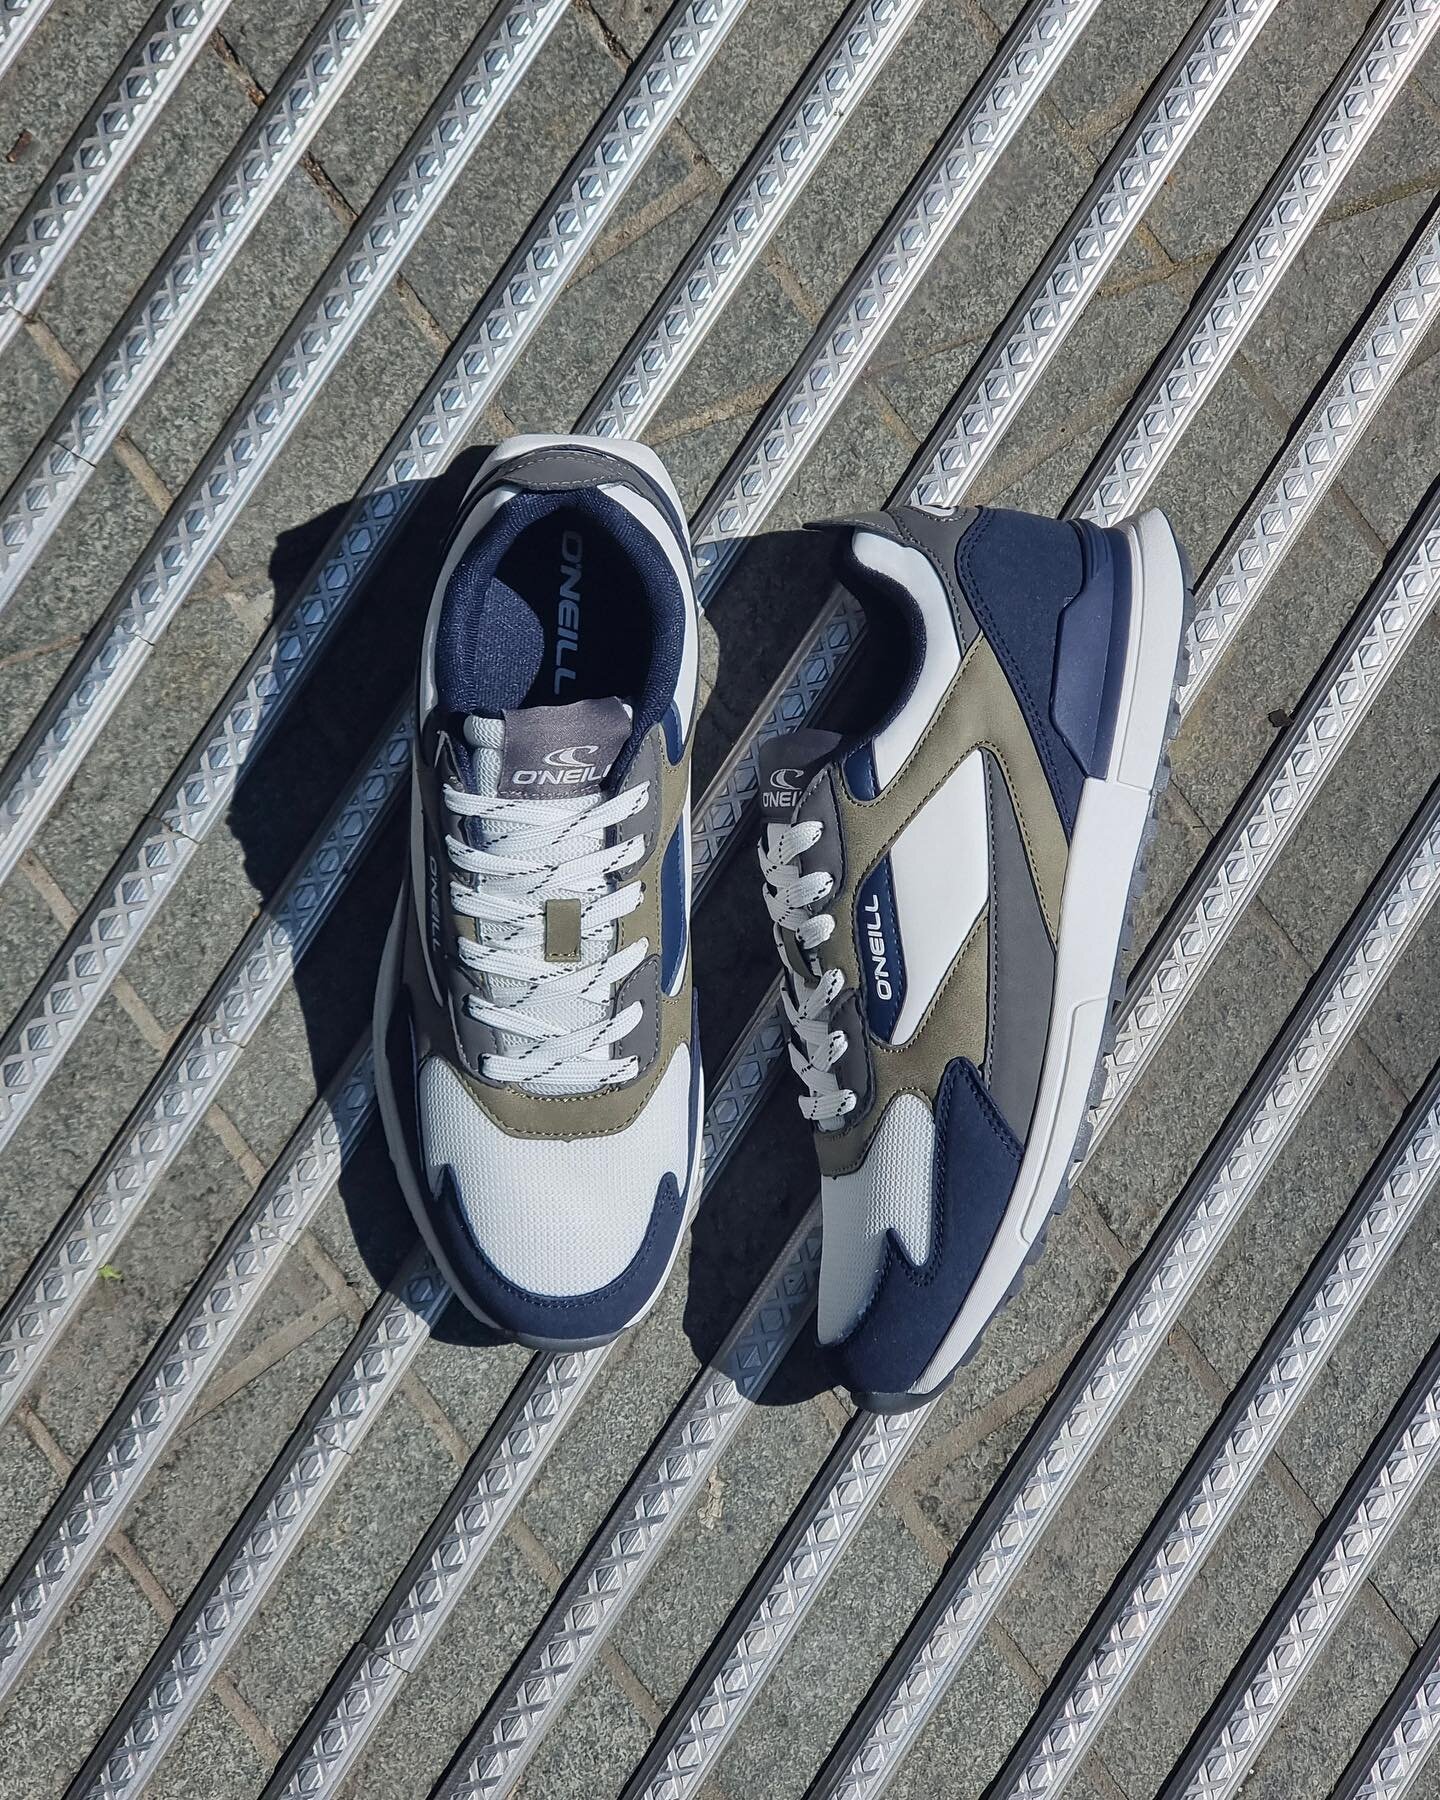 ORTLEY MEN LOW from O&rsquo;Neill is the perfect runner this Summer with new material and colour mixes.
 
Available @soletrader_shoes 
 
#33Joints #Oneill #Oneillfootwear #Oneilleurope #footwear #fashion #style #shoes #footwearfashion #footwearlove #